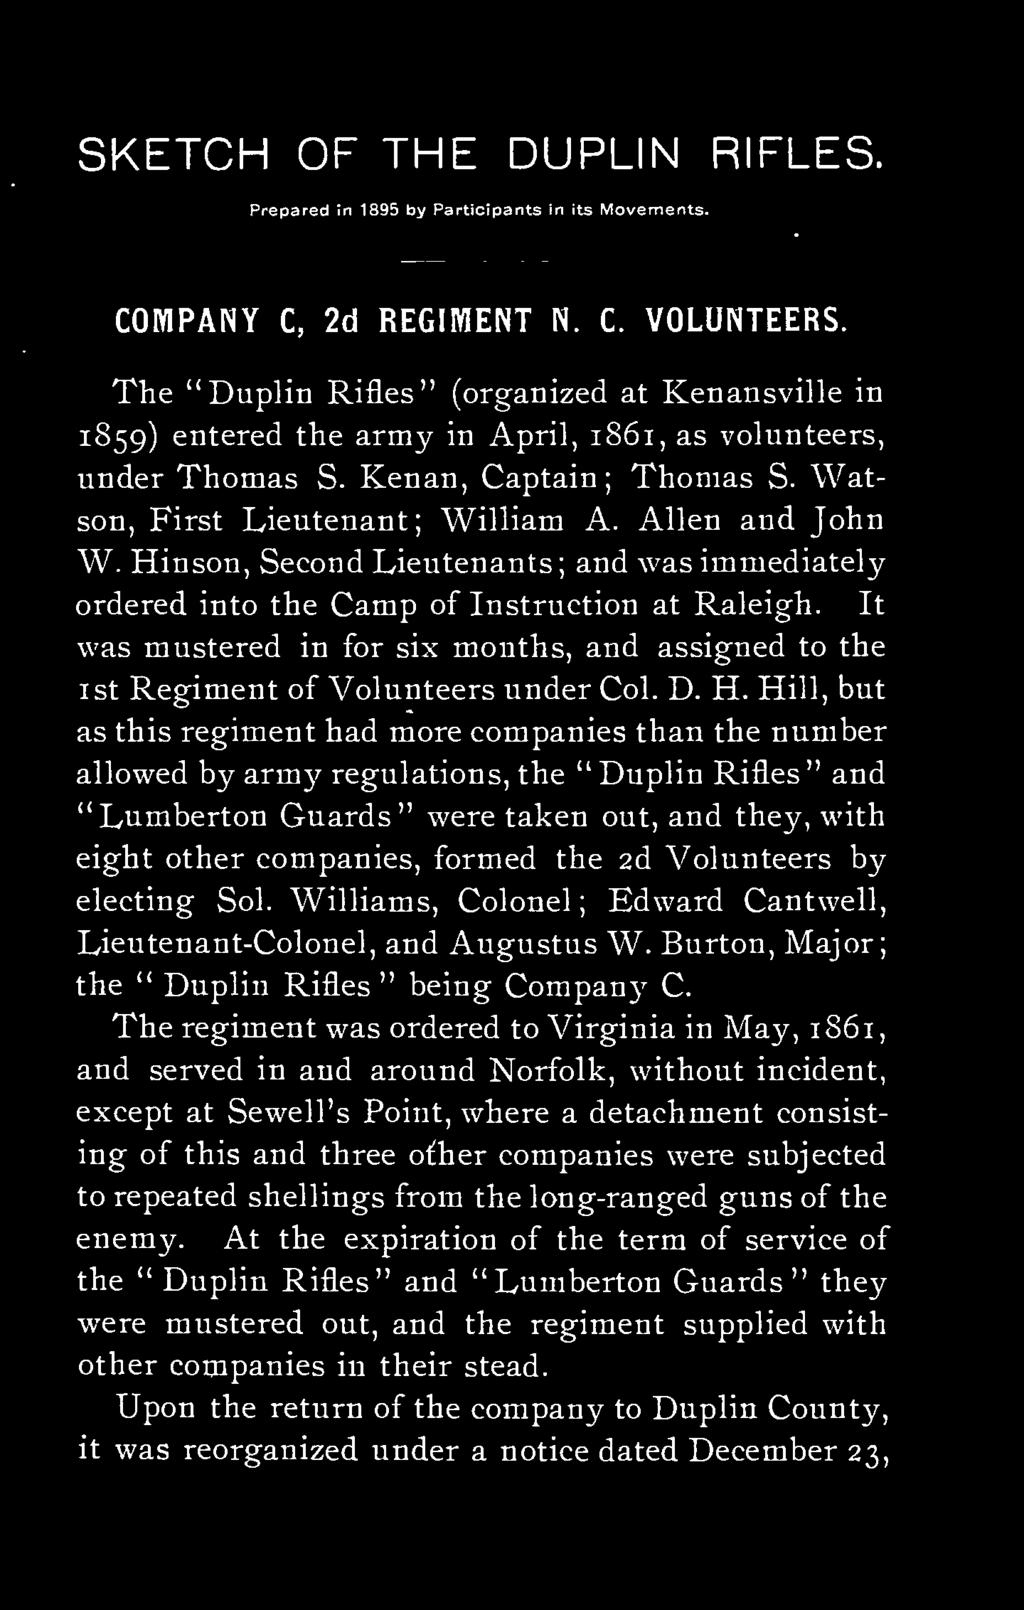 2d Volunteers by electing Sol. Williams, Colonel Edward Cant well, Lieutenant-Colonel, and Augustus W. Burton, Major the " Duplin Rifles " being Company C.